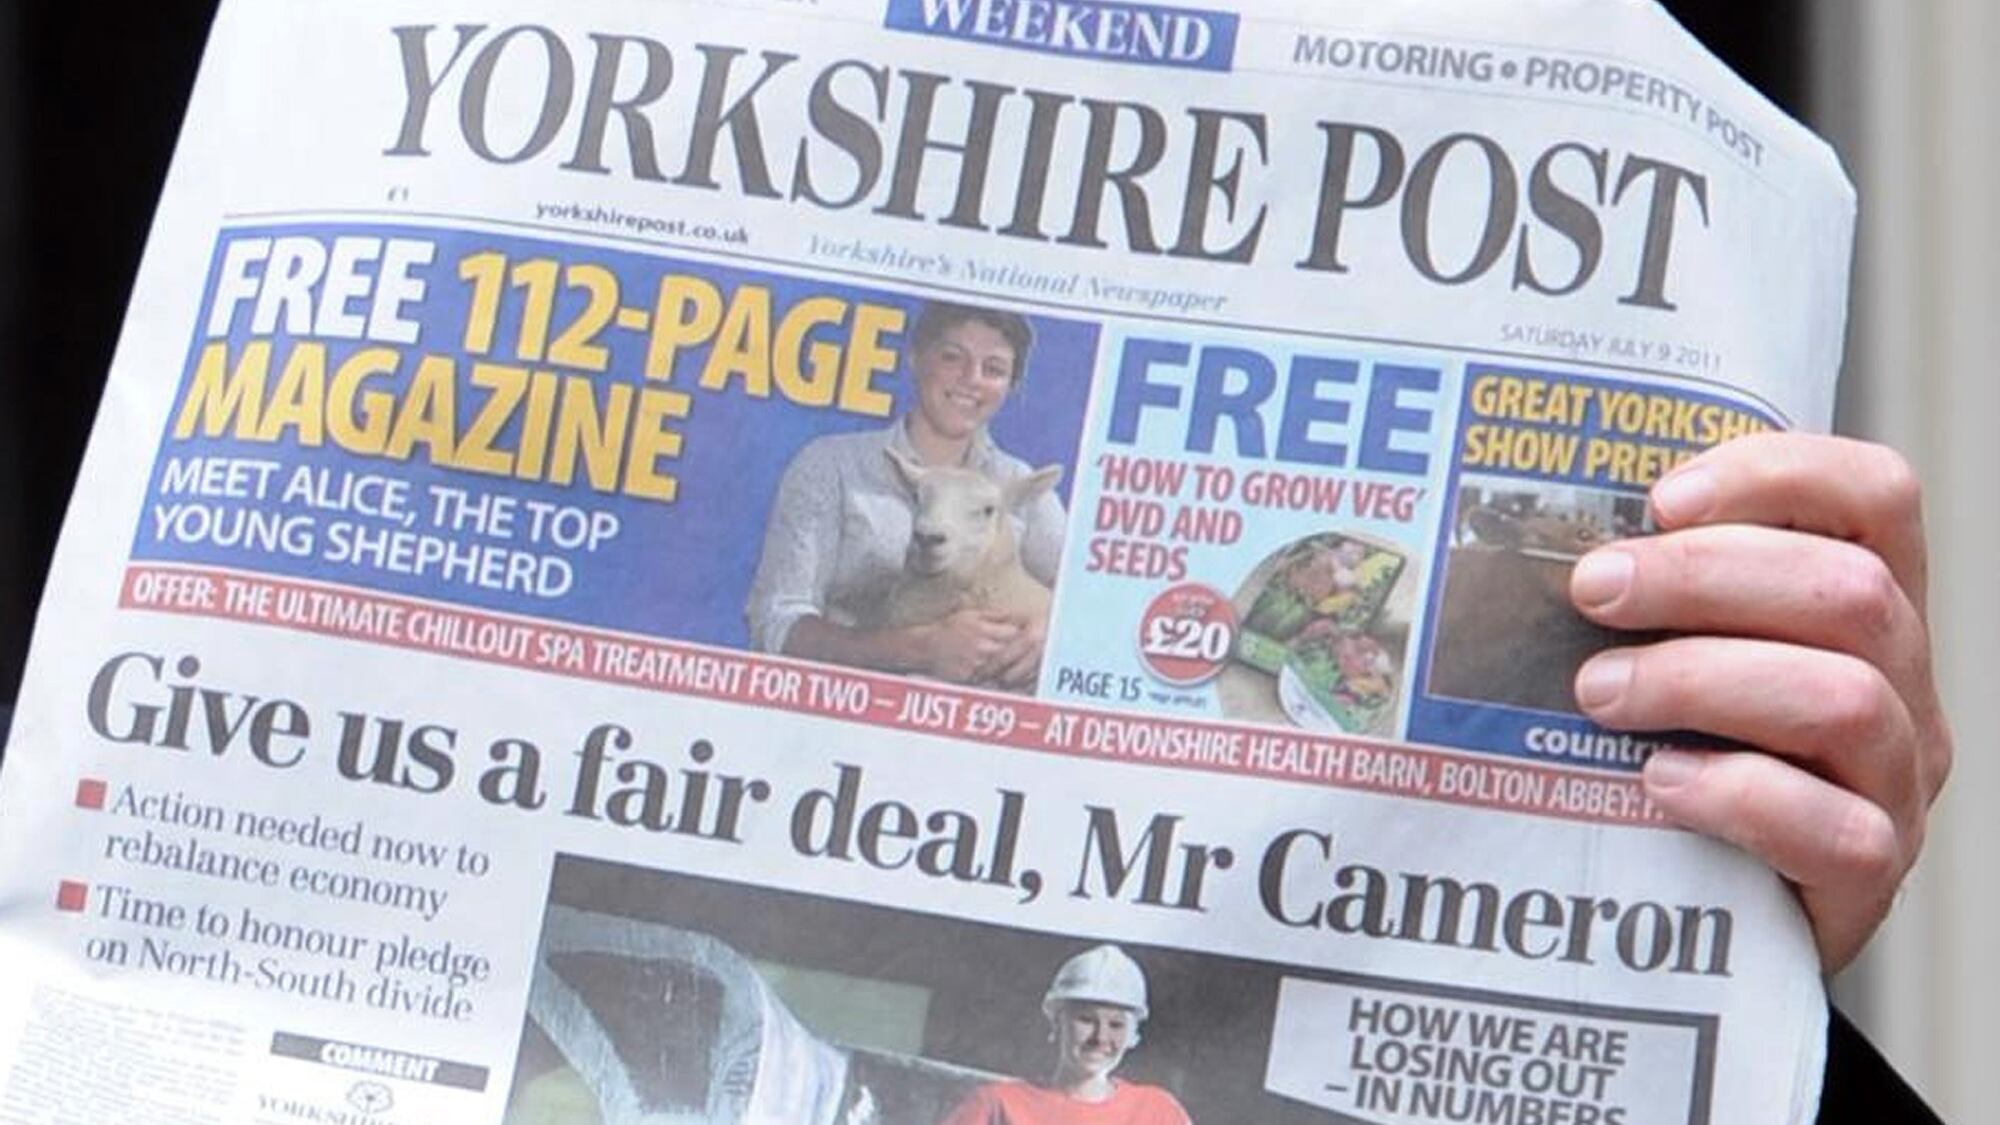 Yorkshire Post owner National World has said it is getting closer to fully automating its newspaper production